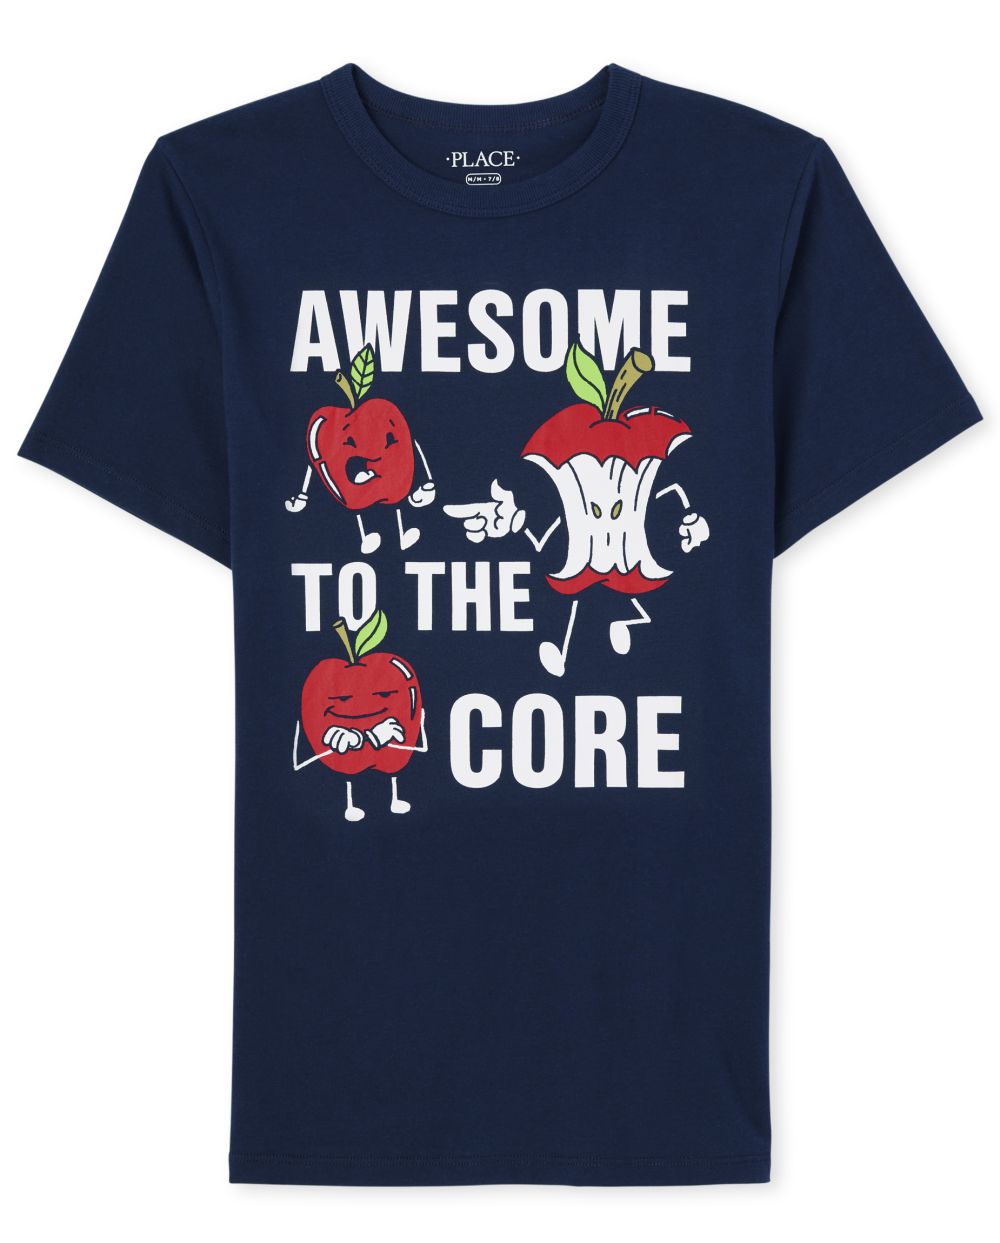 The Children's Place Boys Awesome Graphic Tee - Blue - L (10/12)